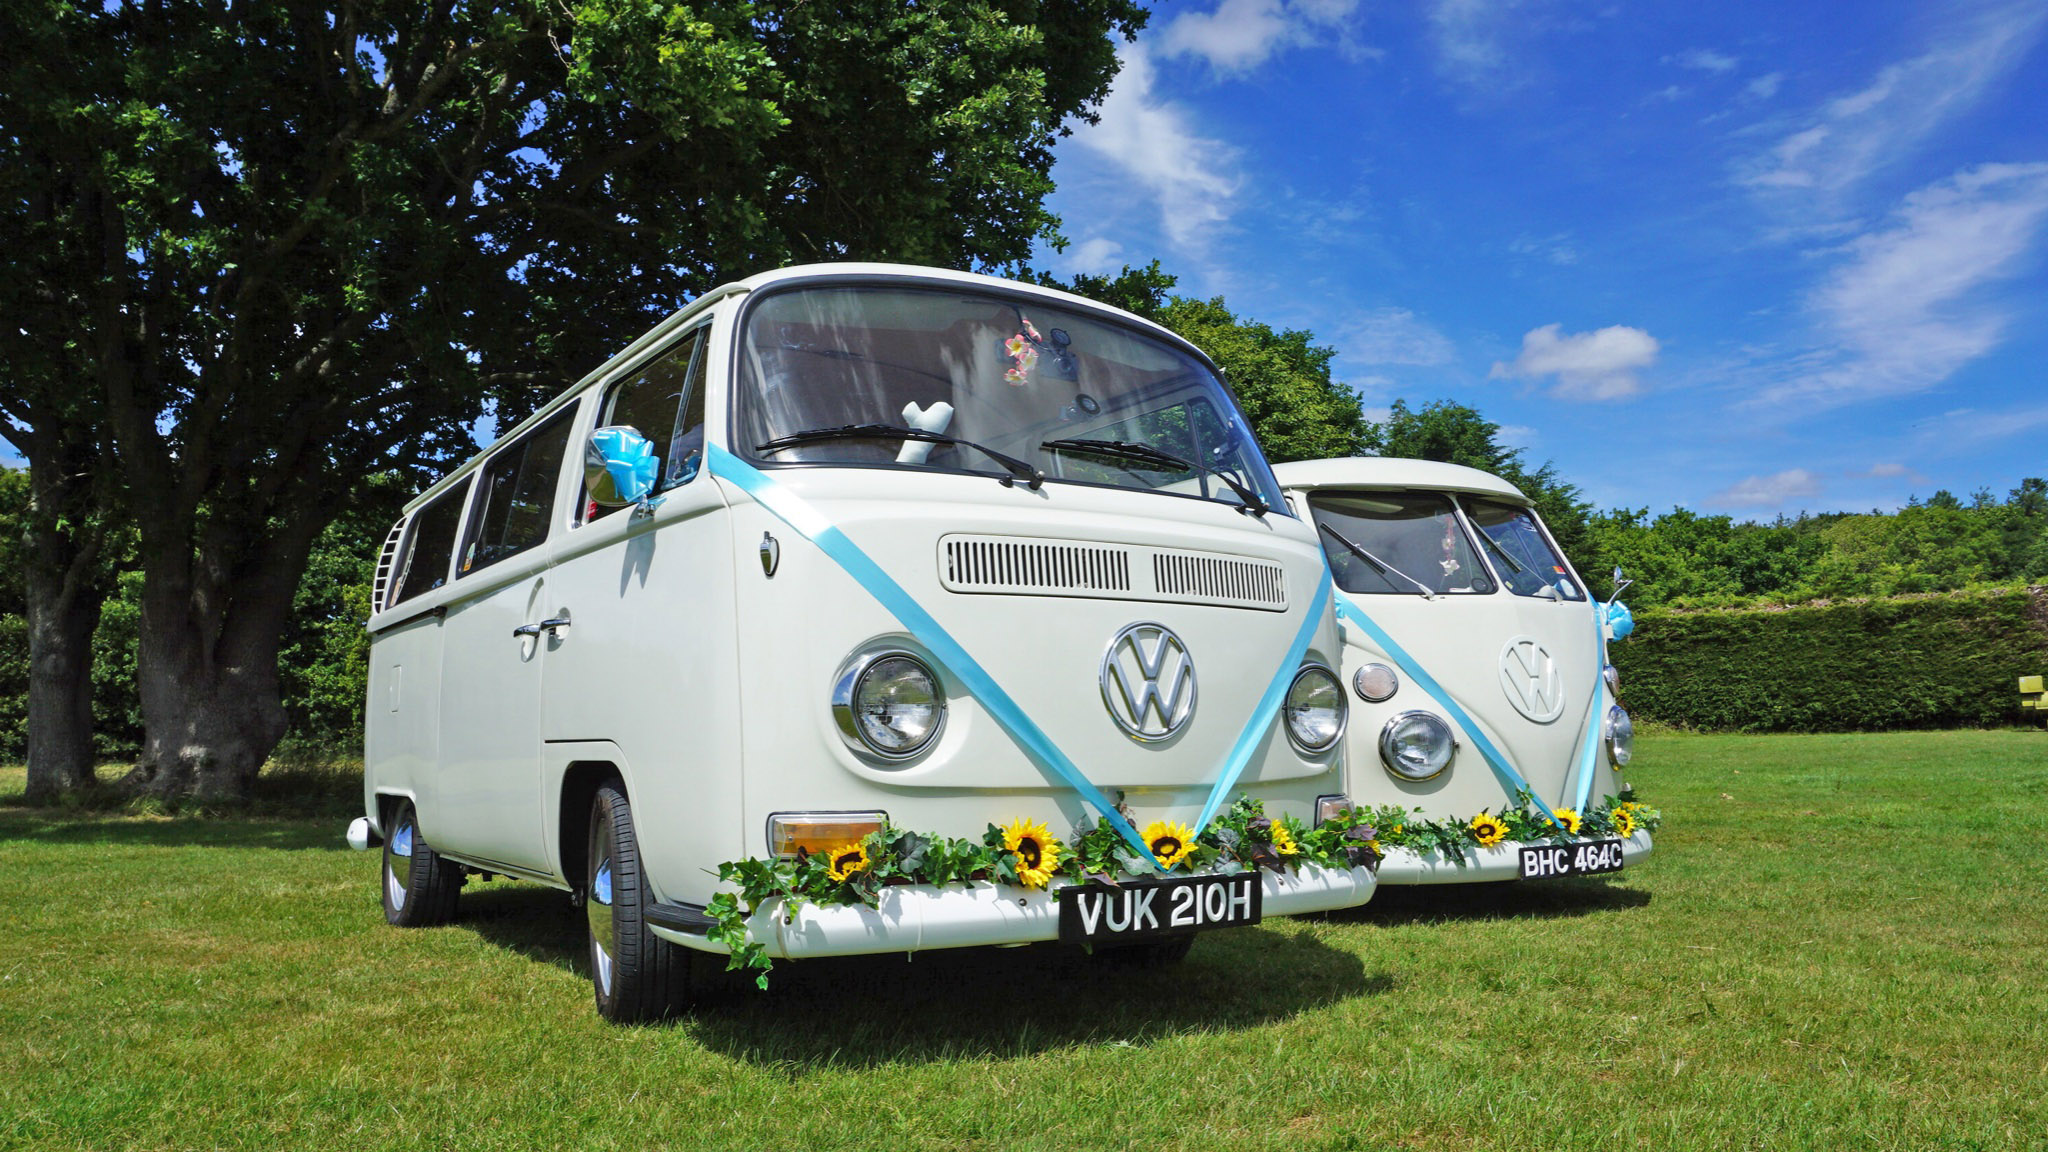 Two Classic VW Campervans decorated with turquoise blue Ribbons at a local Egham park with green trees in the background